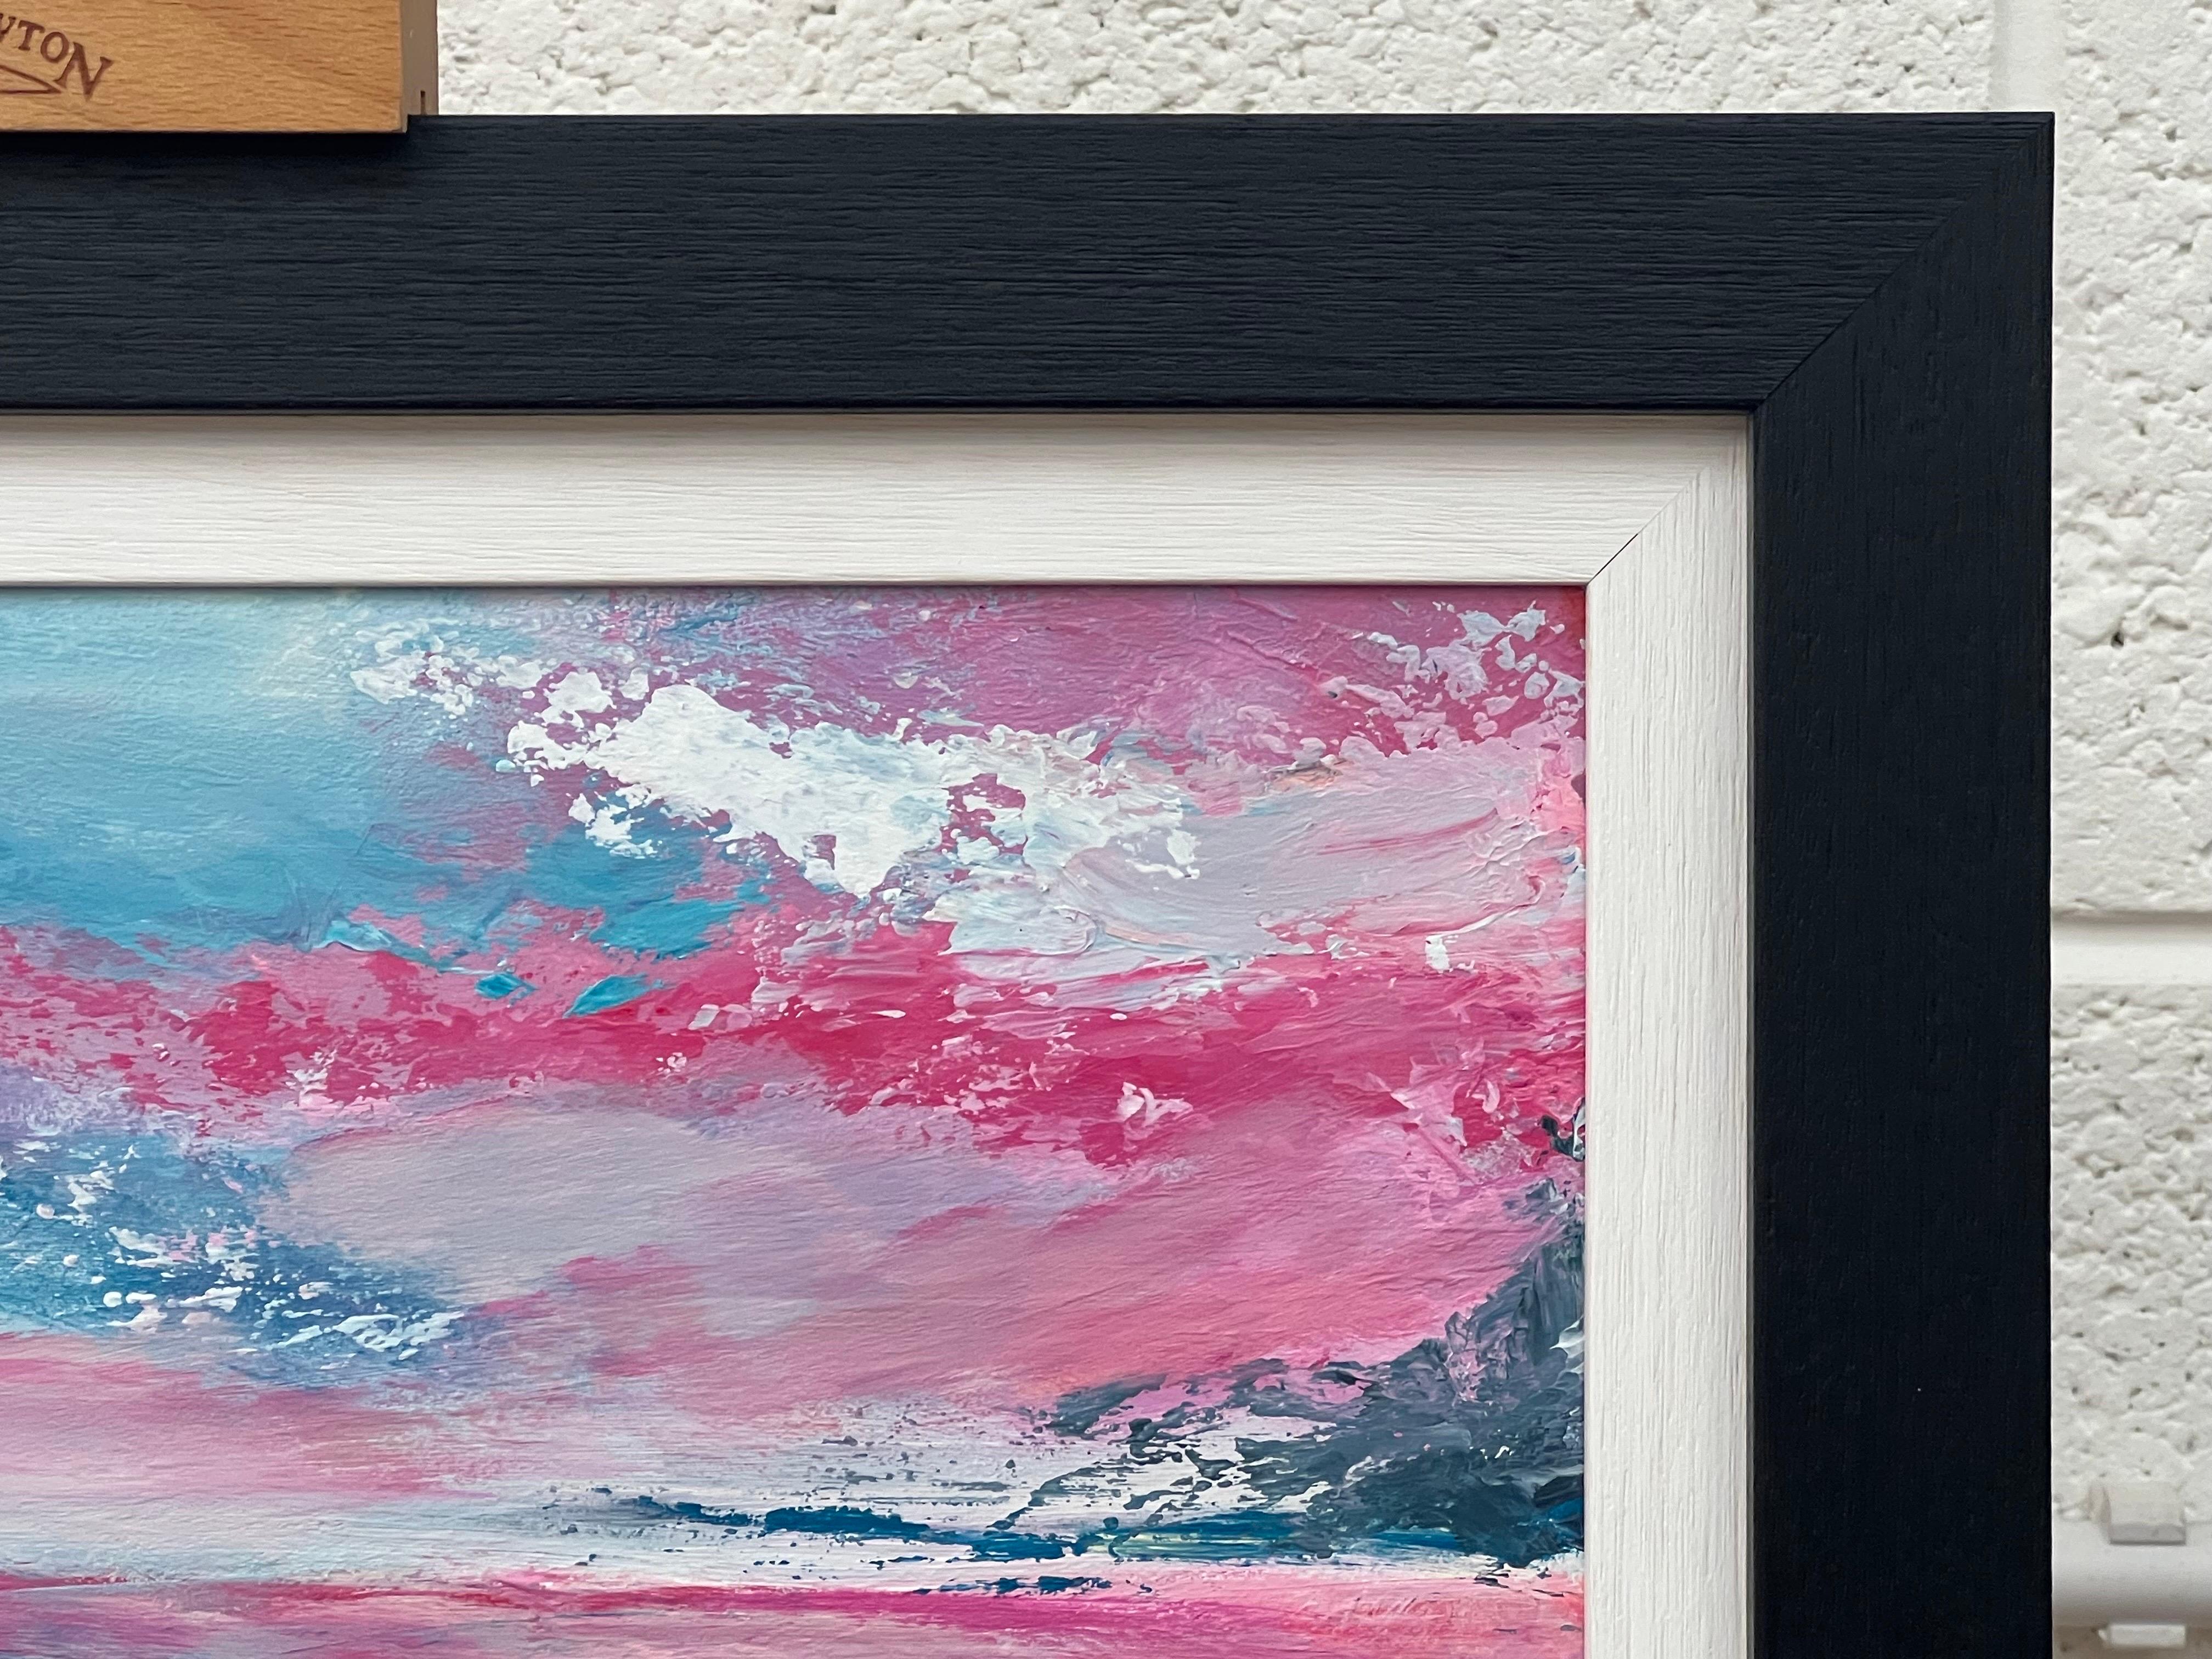 Abstract Landscape Seascape Painting with Pink & Blue Sky by British Artist For Sale 7